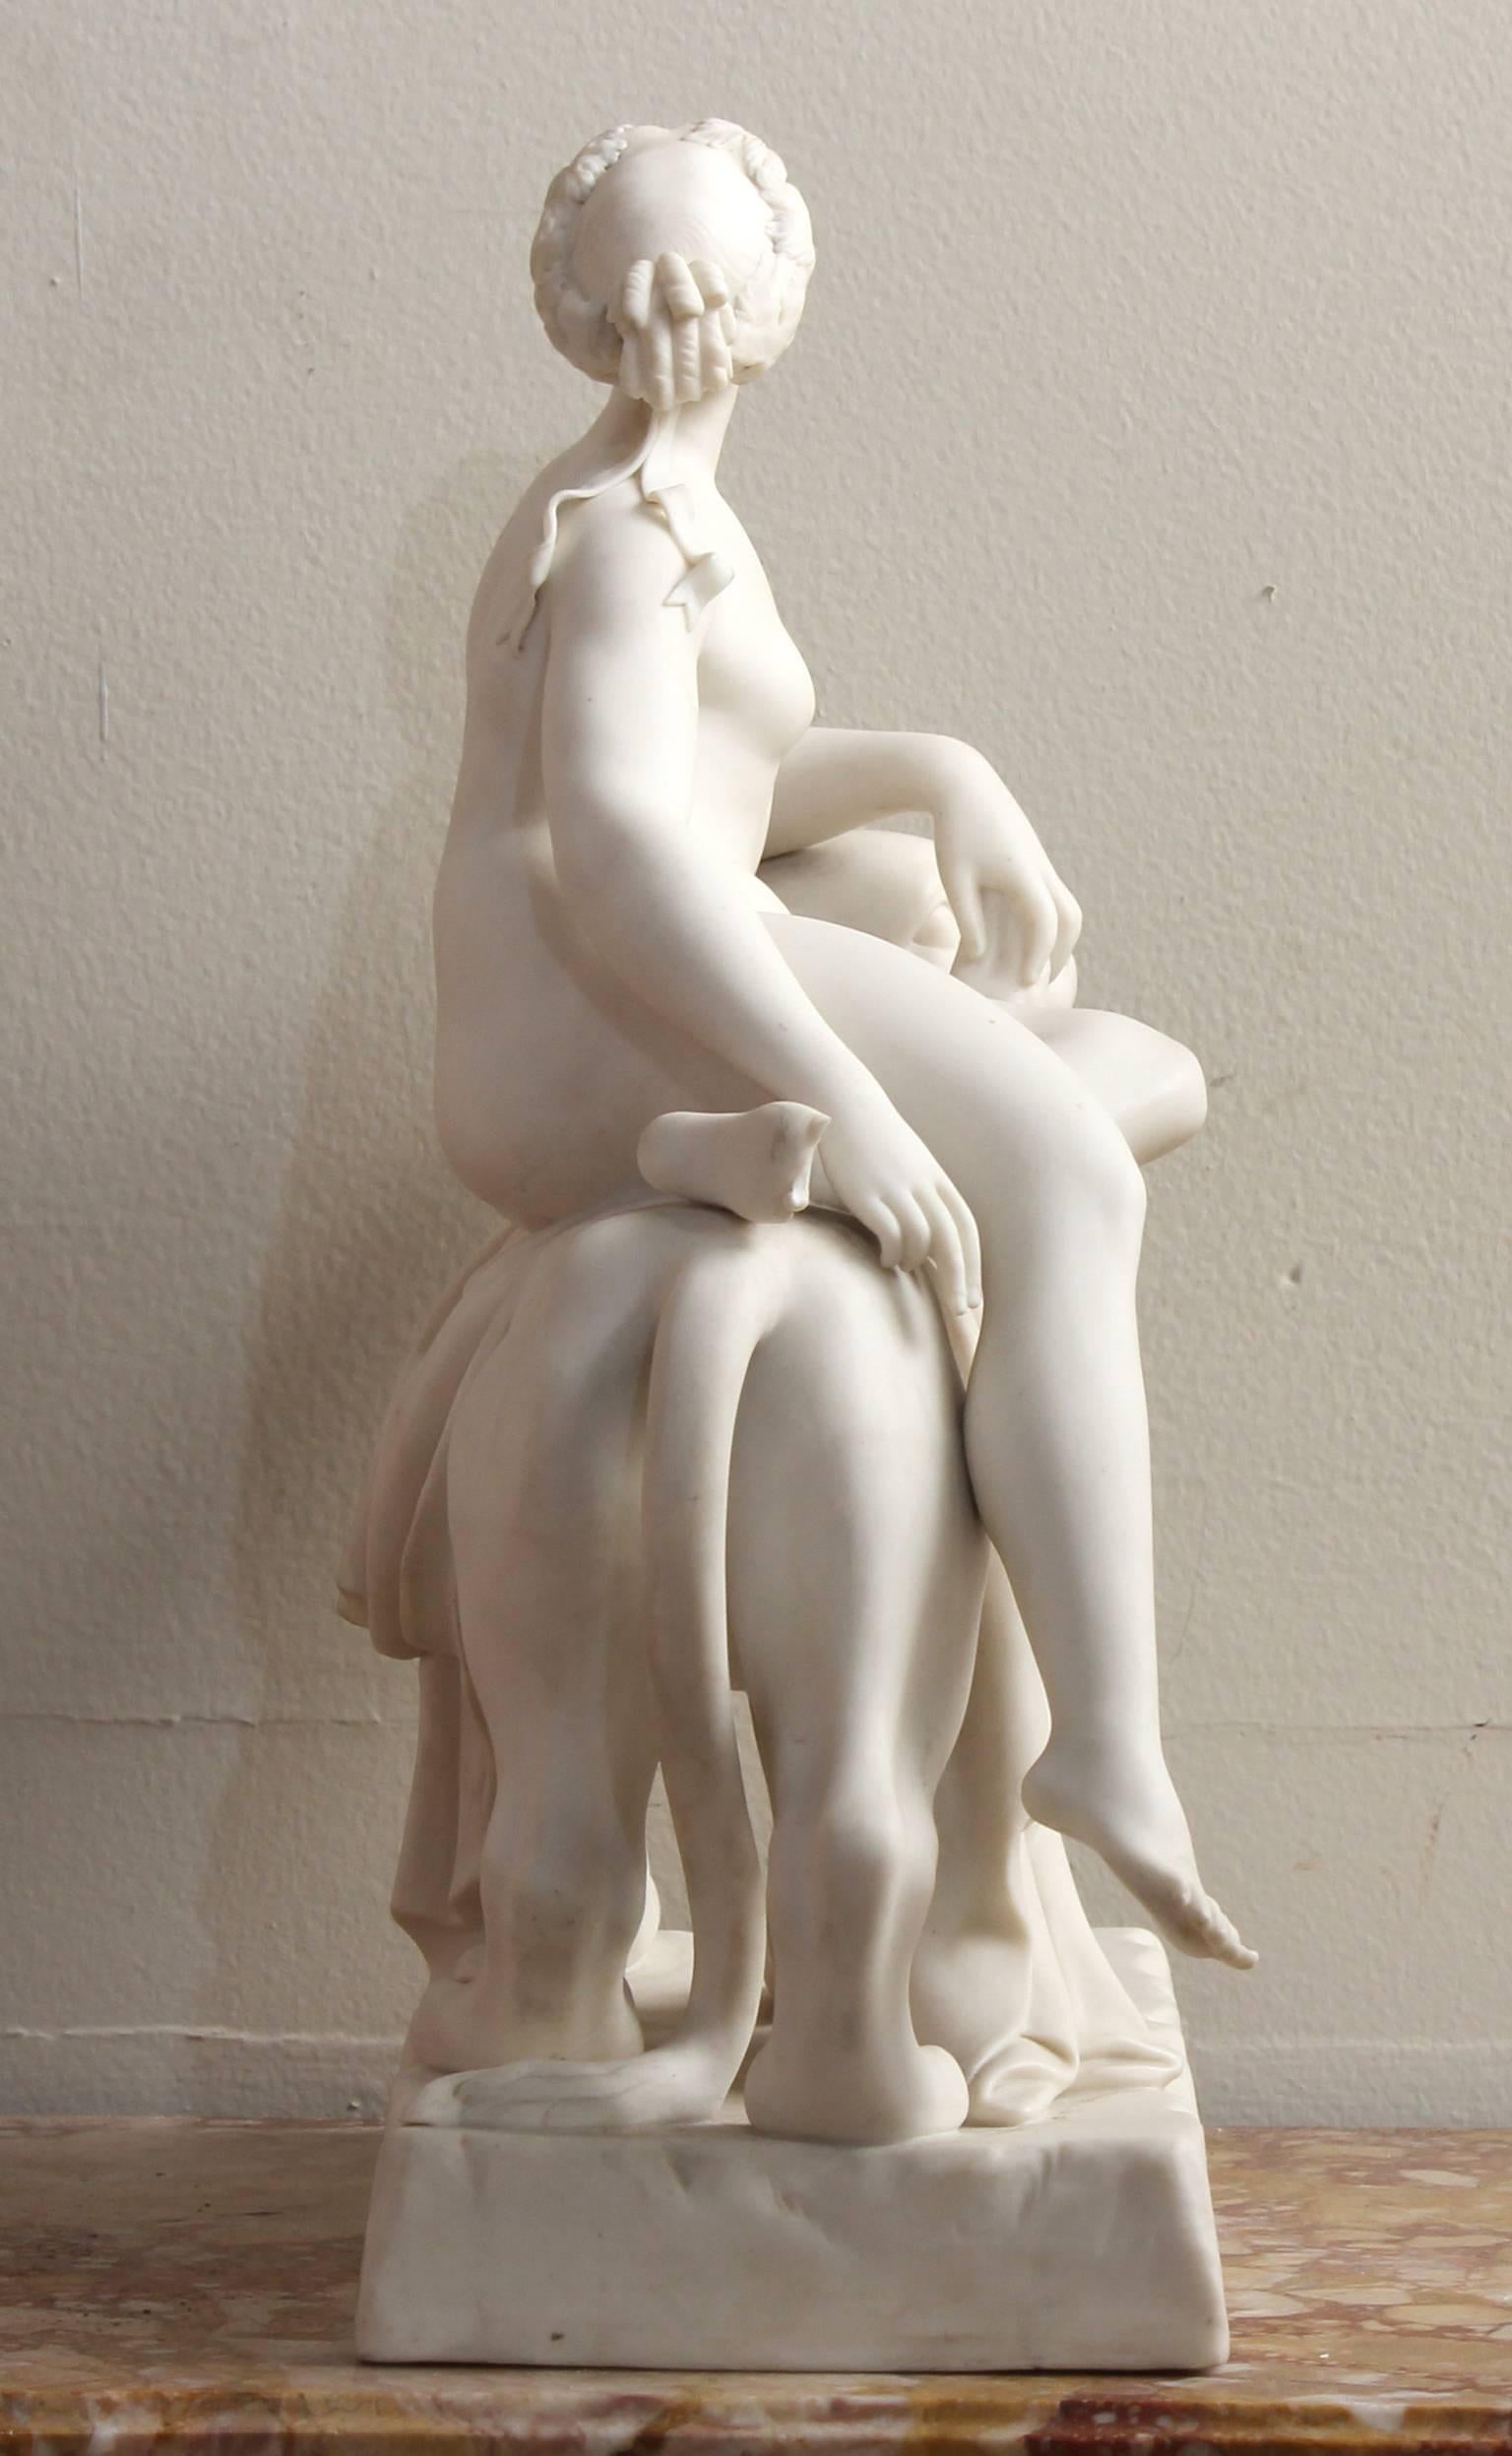 English Mid-19th Century Parian Ware Statue of 